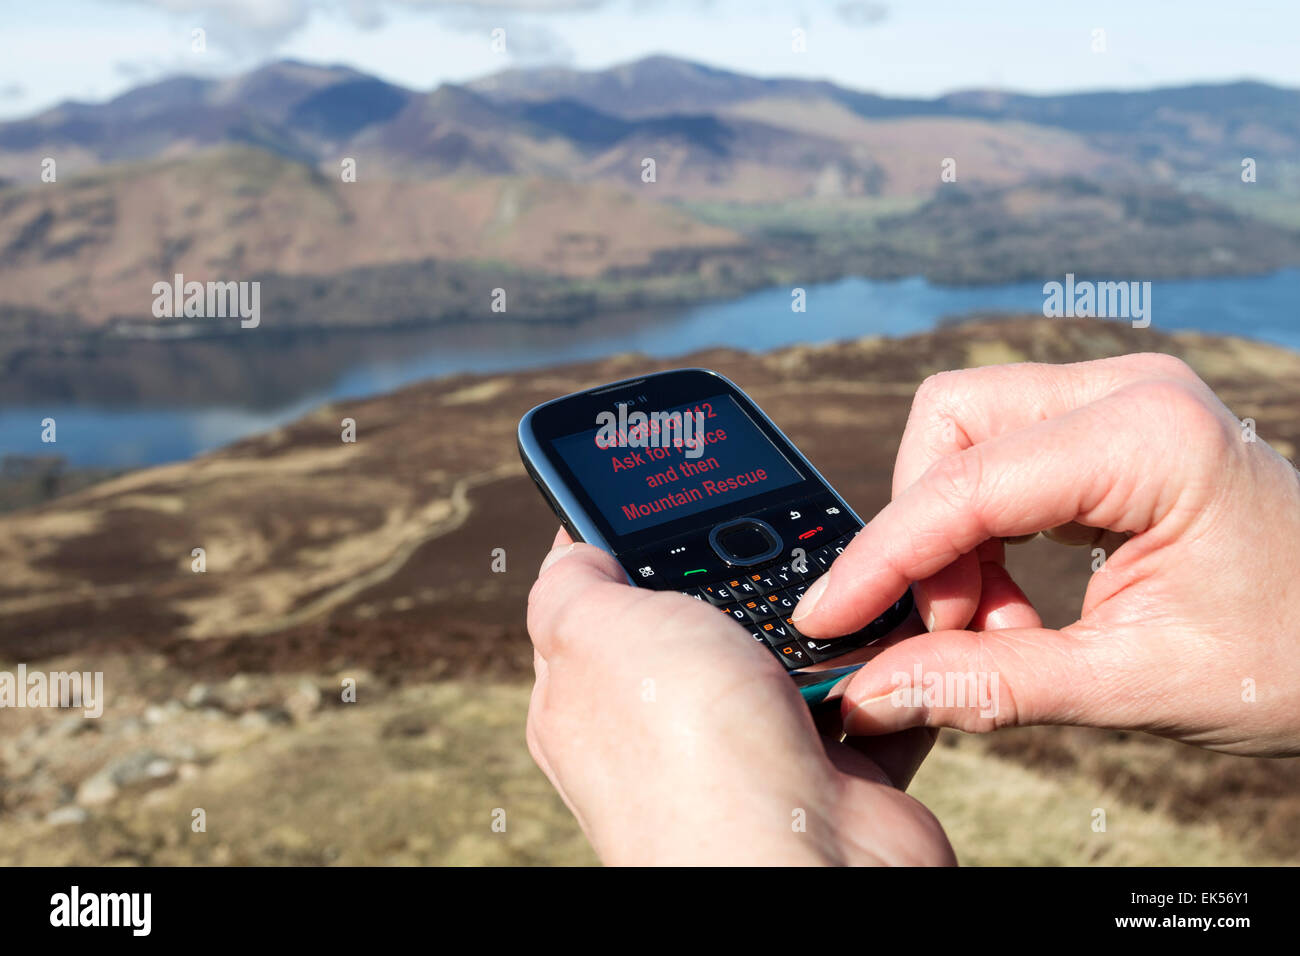 Concept Image of a Person Using a Mobile Phone in the Mountains to Call Out a Mountain Rescue Team Lake District Cumbria UK Stock Photo